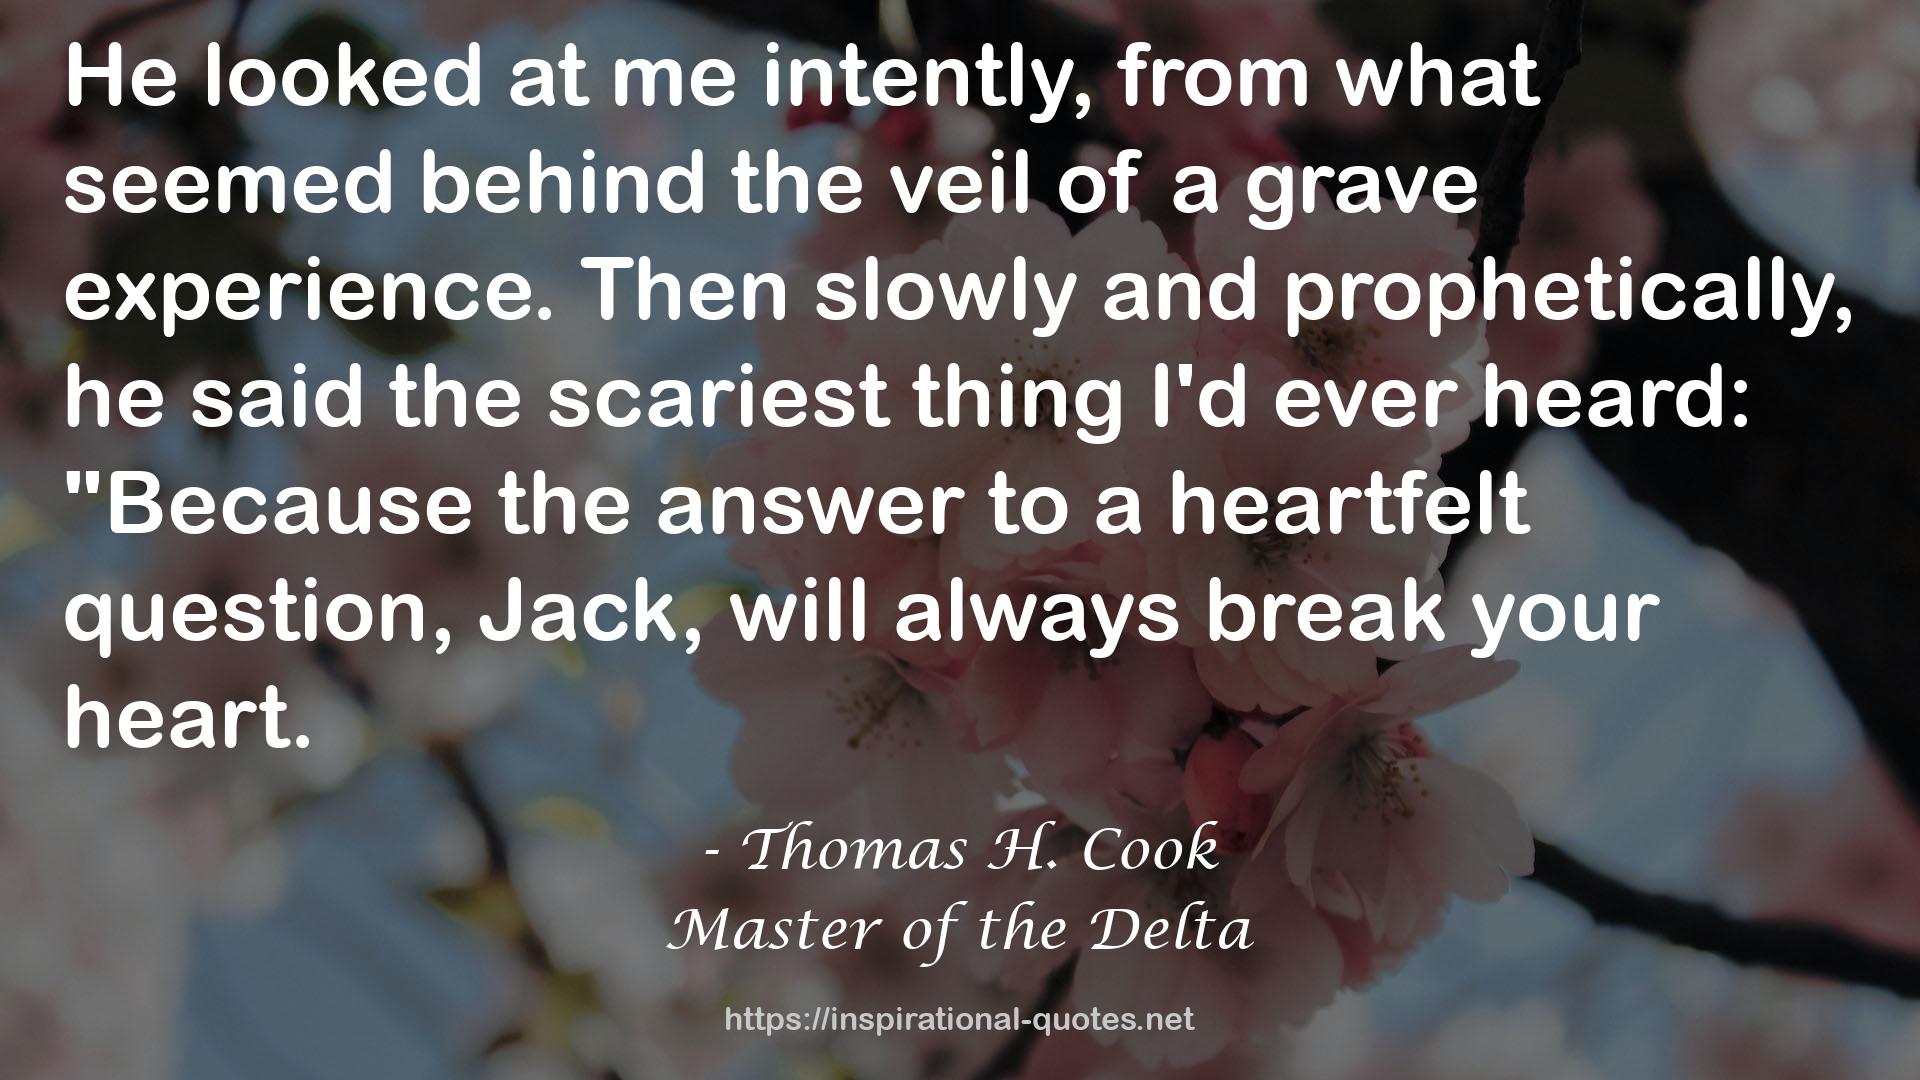 Master of the Delta QUOTES